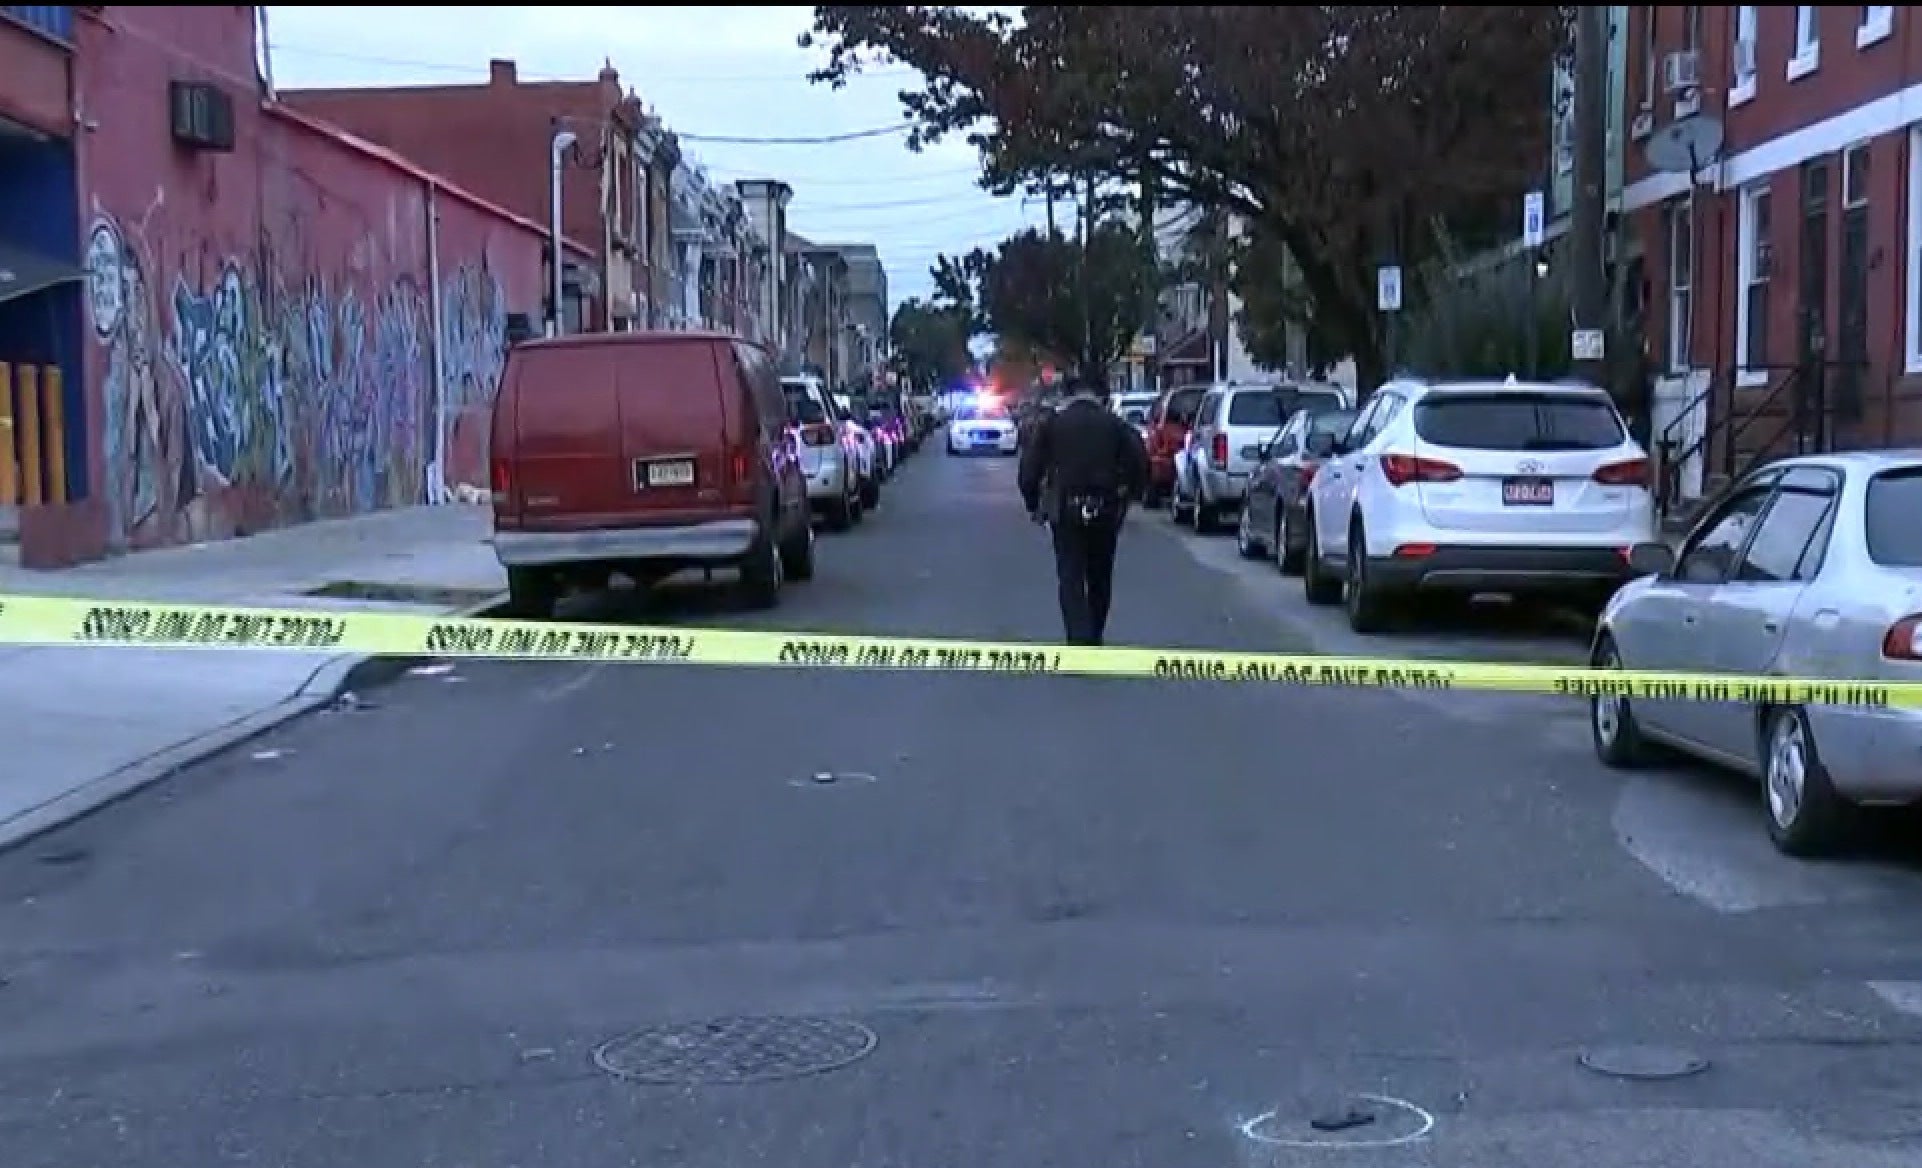 Philadelphia shooting injures 6, including 1 in critical condition, police say